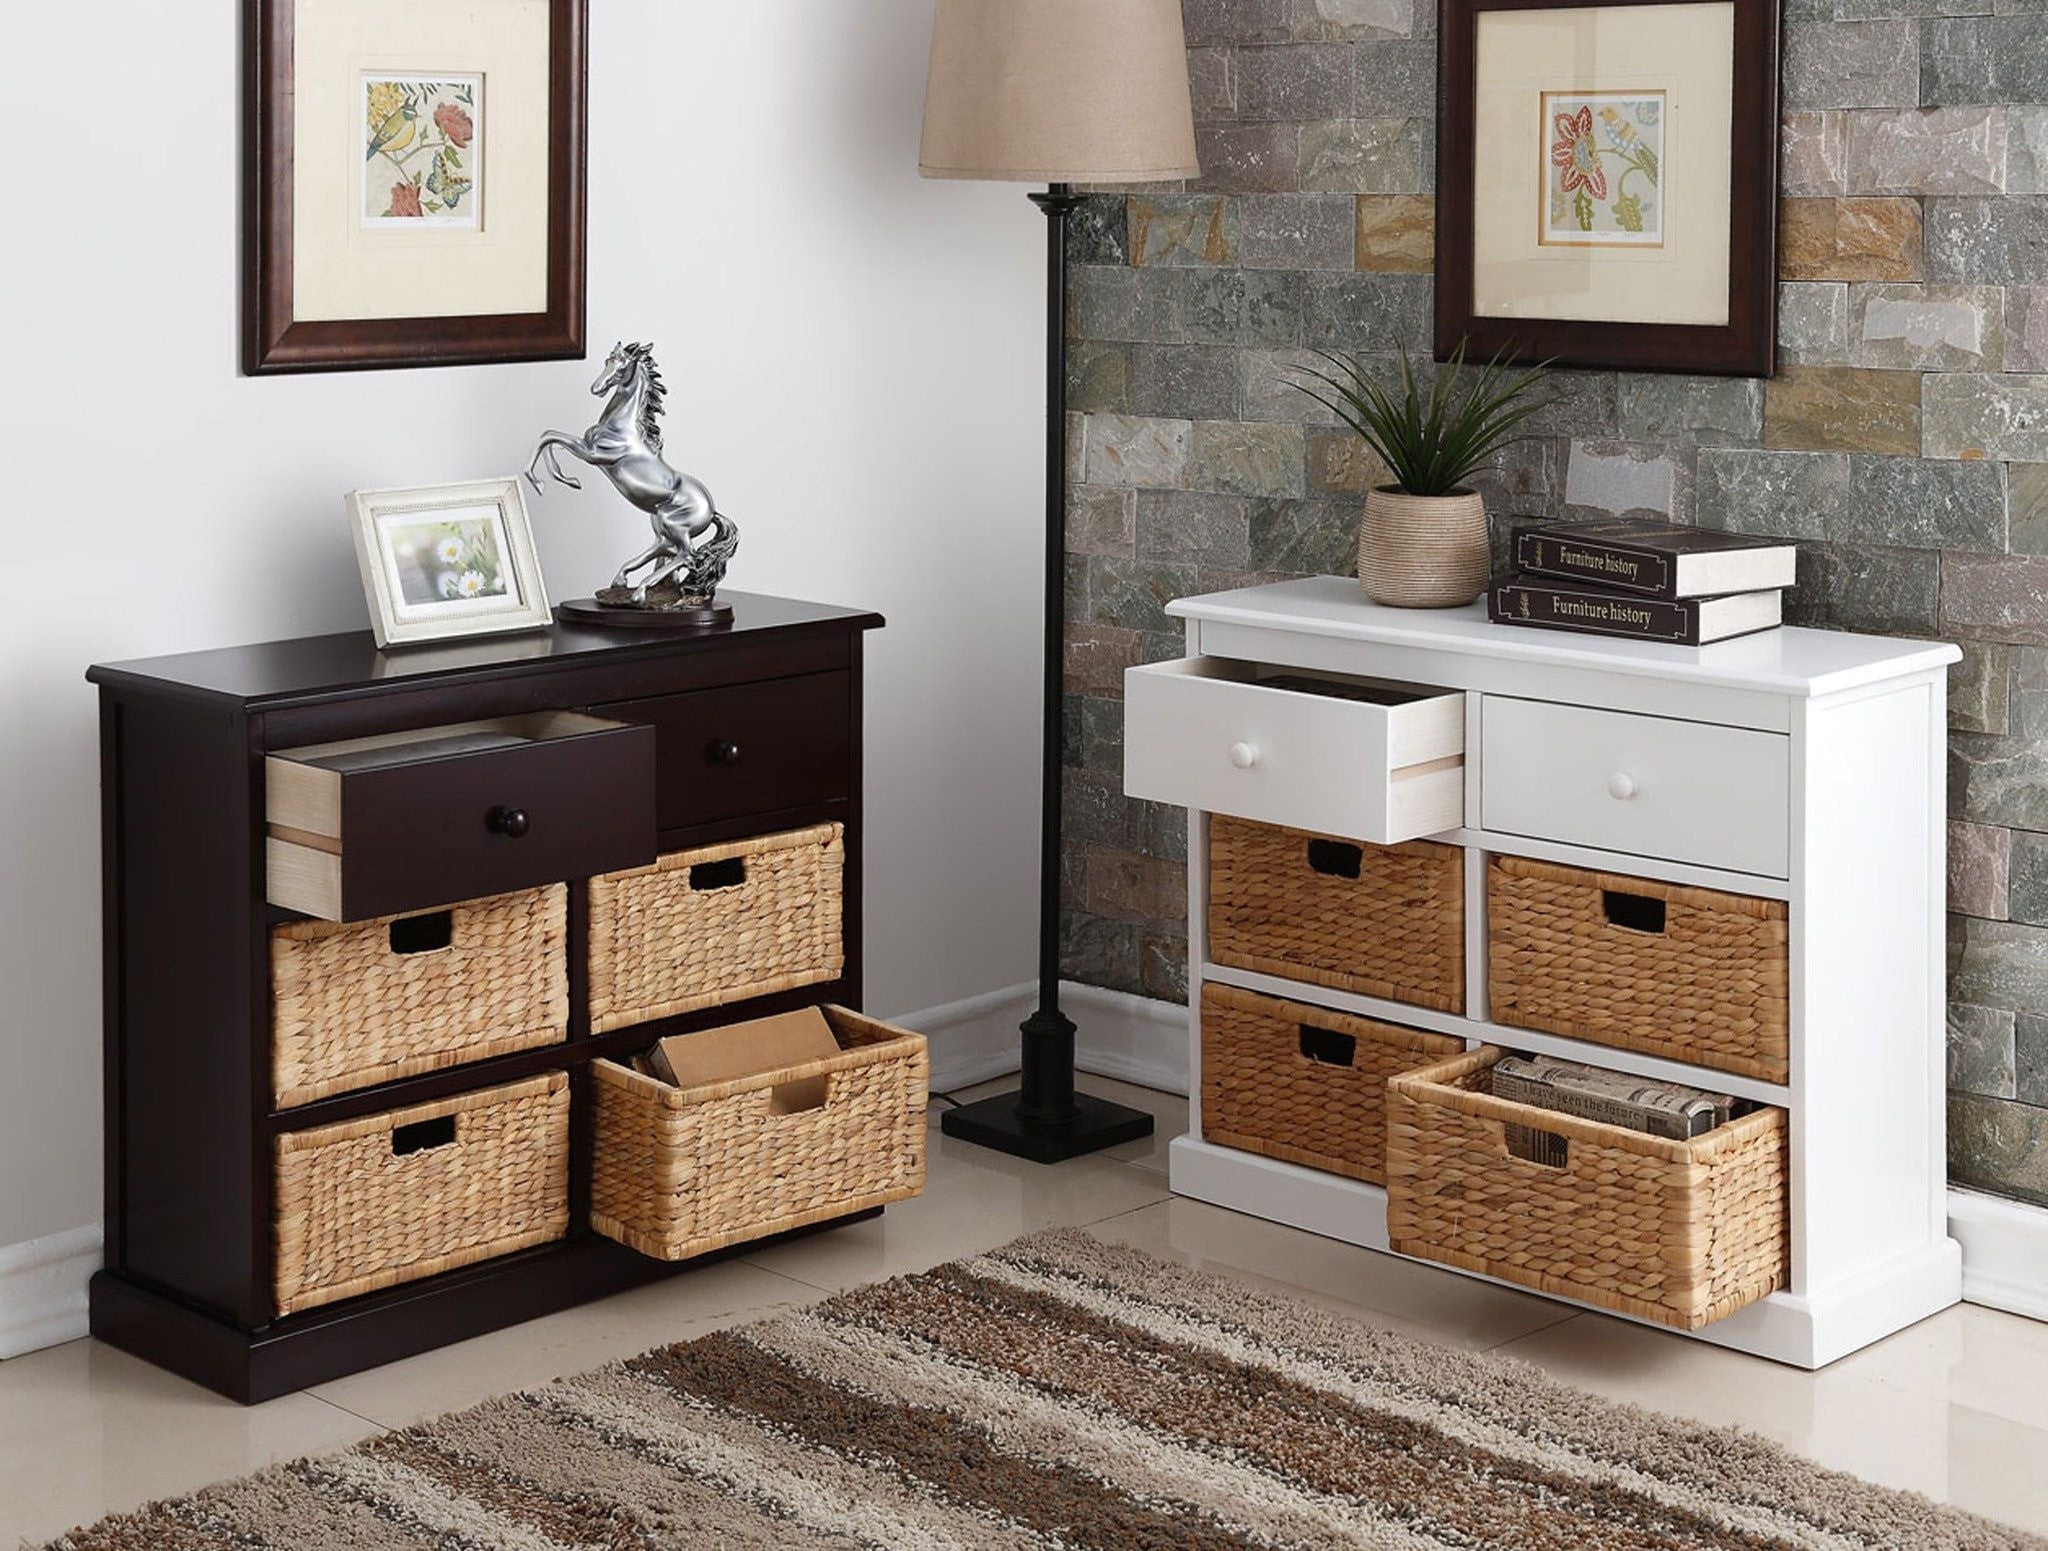 Wicker Cabinet – Pacific Imports, Inc.